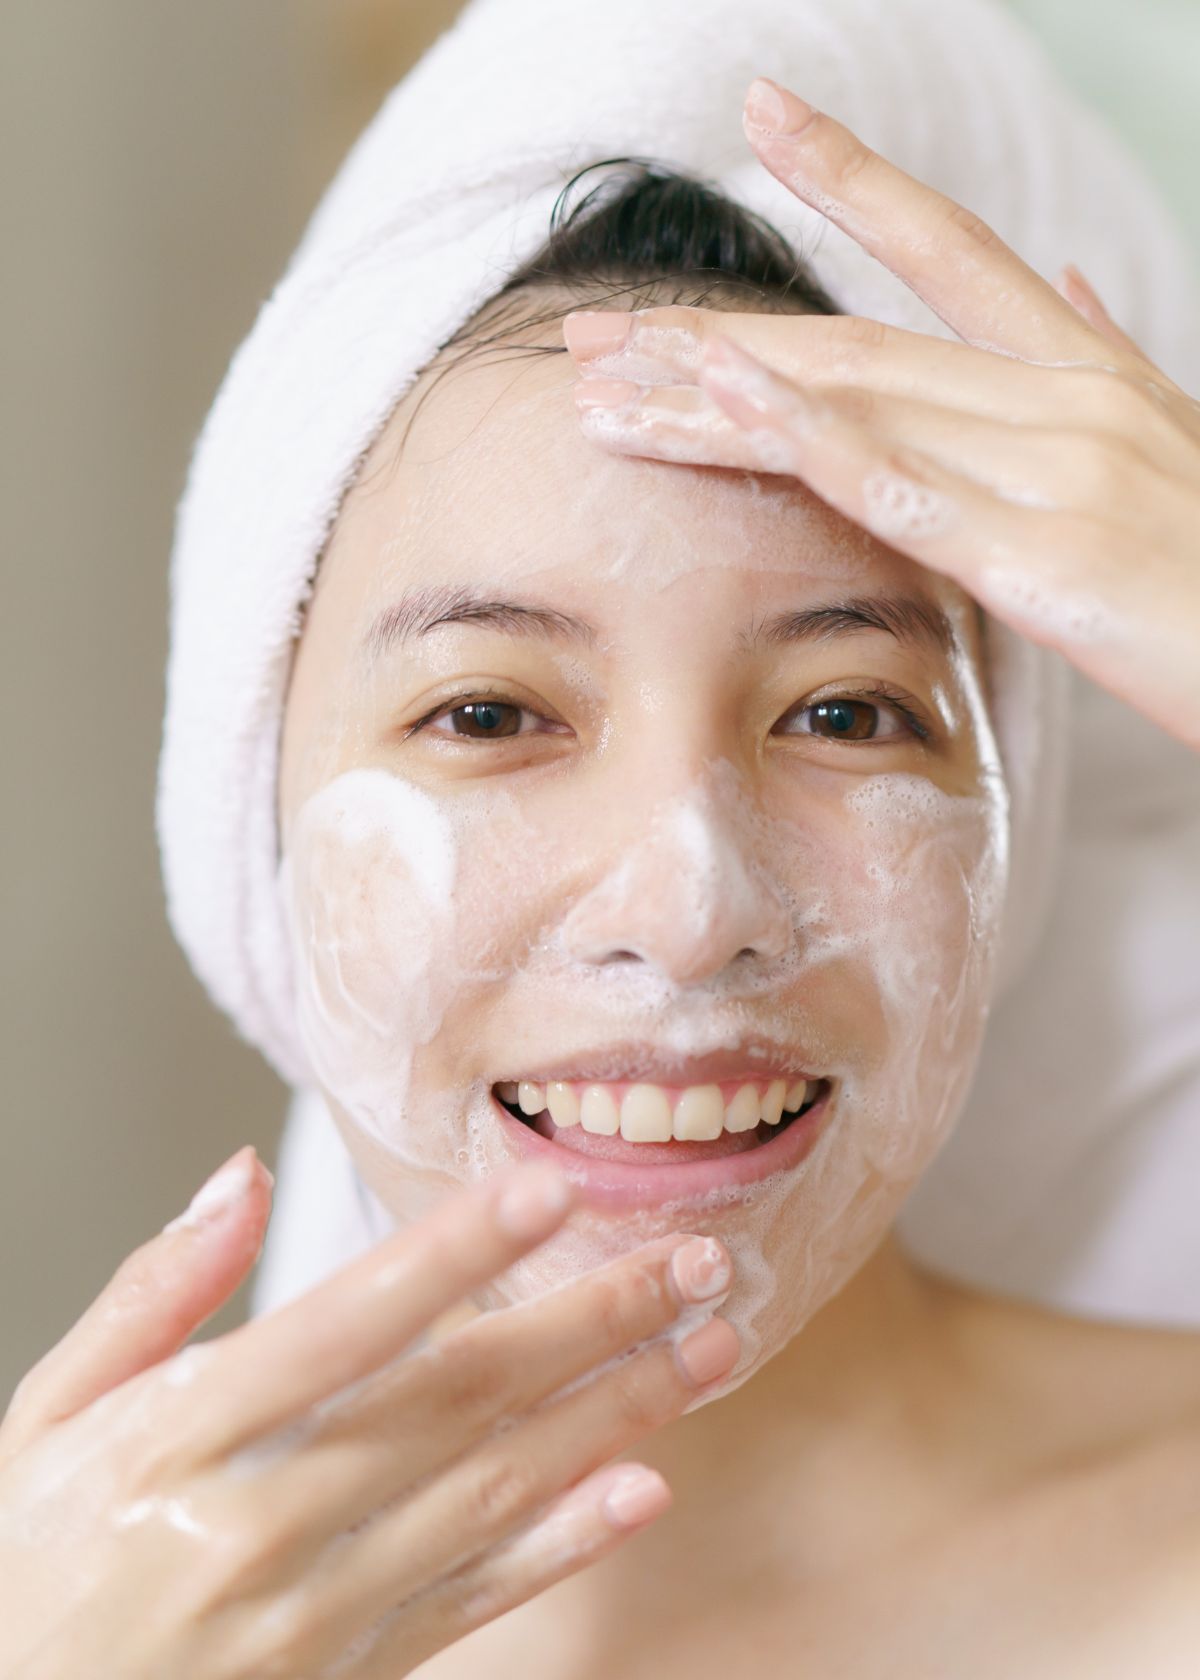 Discovering the Best 5 Korean Cleansers for Acne-Prone Skin